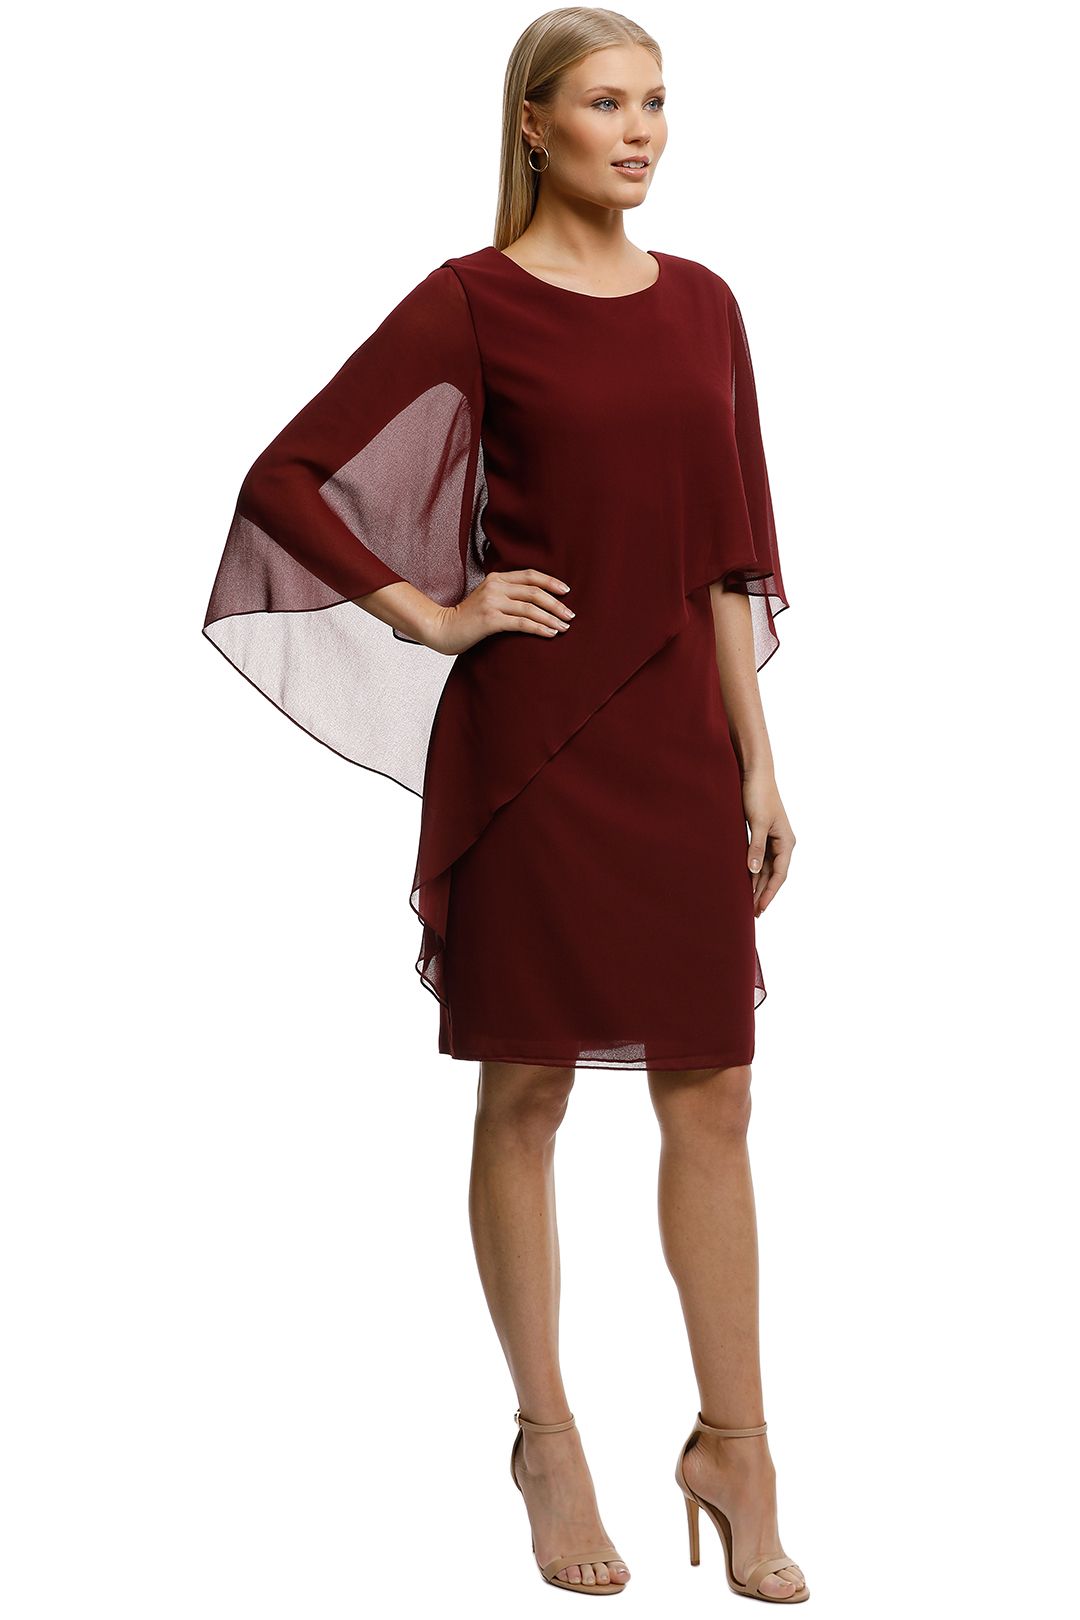 Ciana Cocktail Dress Wine by Montique for Hire